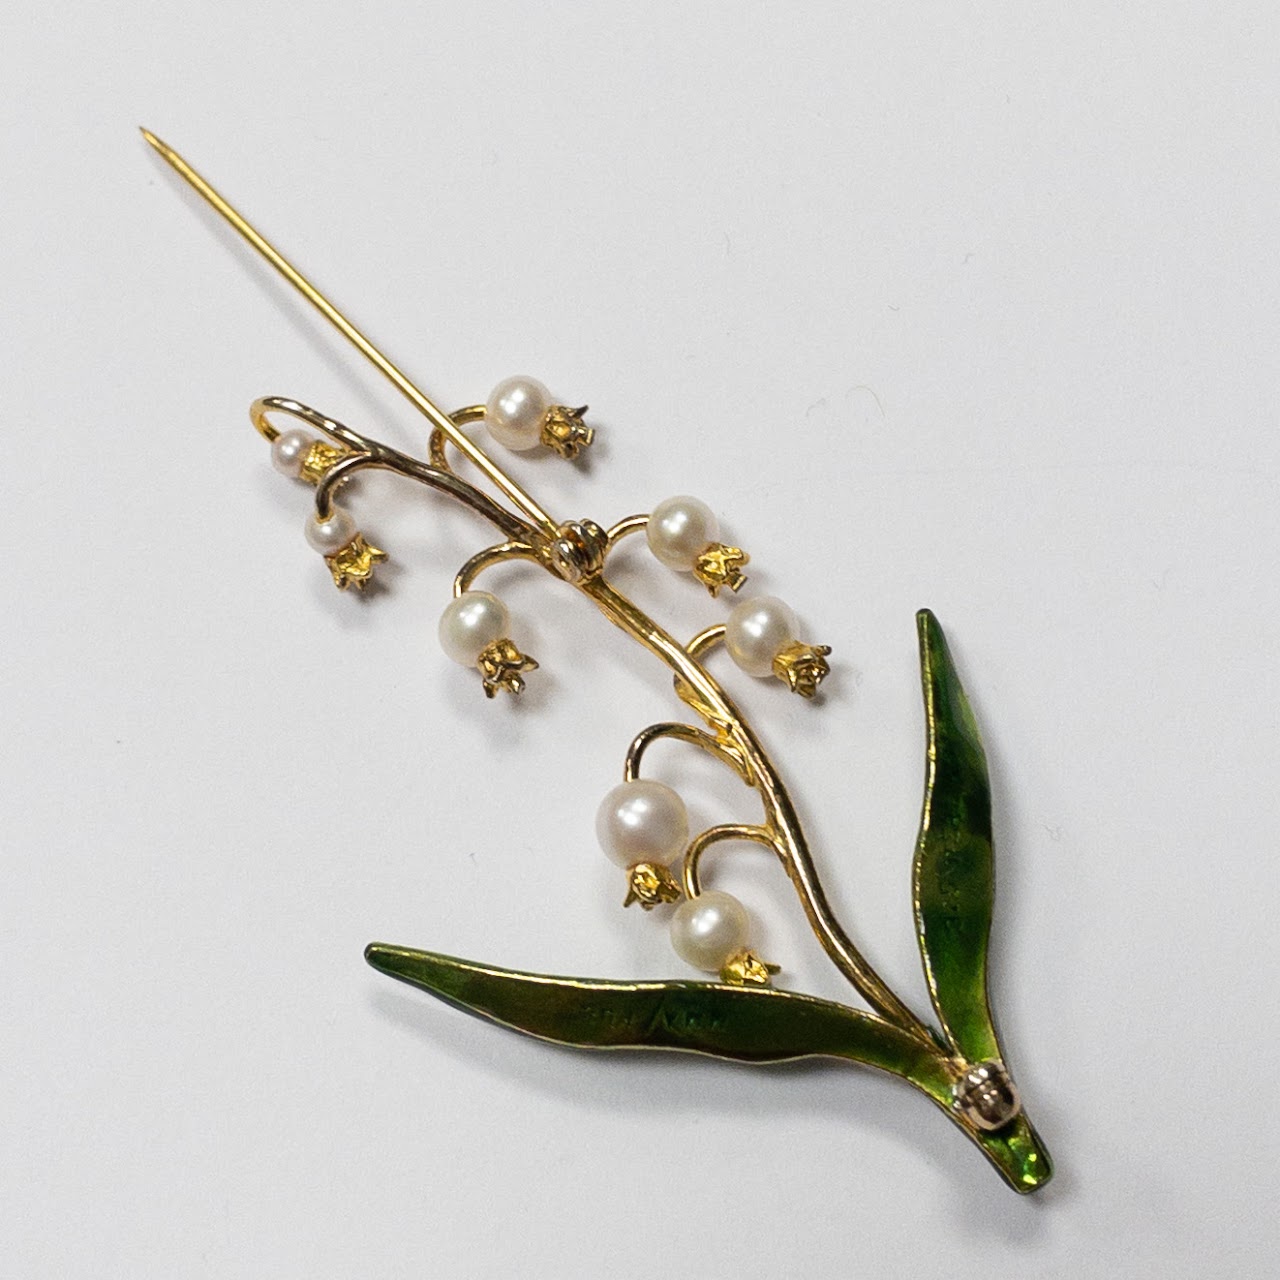 Vermeil, Enamel & Pearl Lily of the Valley MMA Brooch